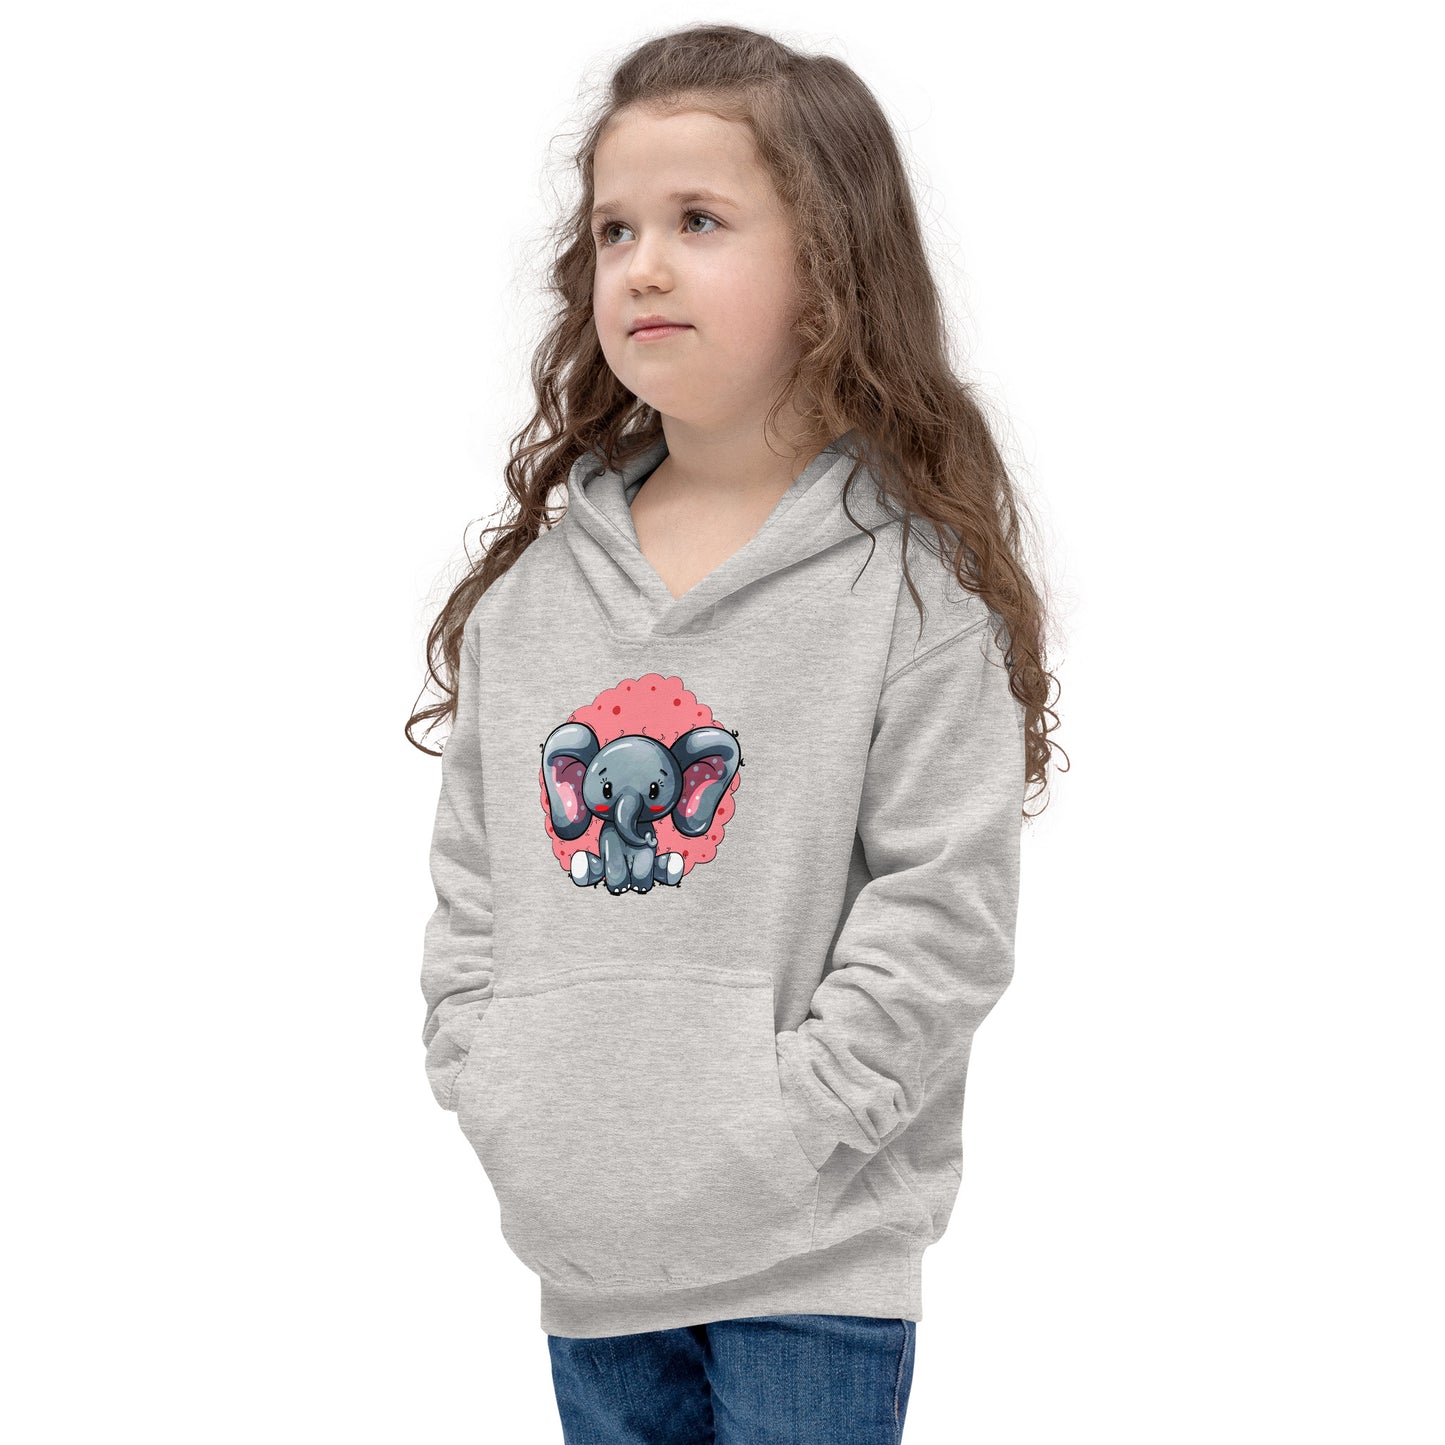 Lovely Baby Elephant Hoodie, No. 0464